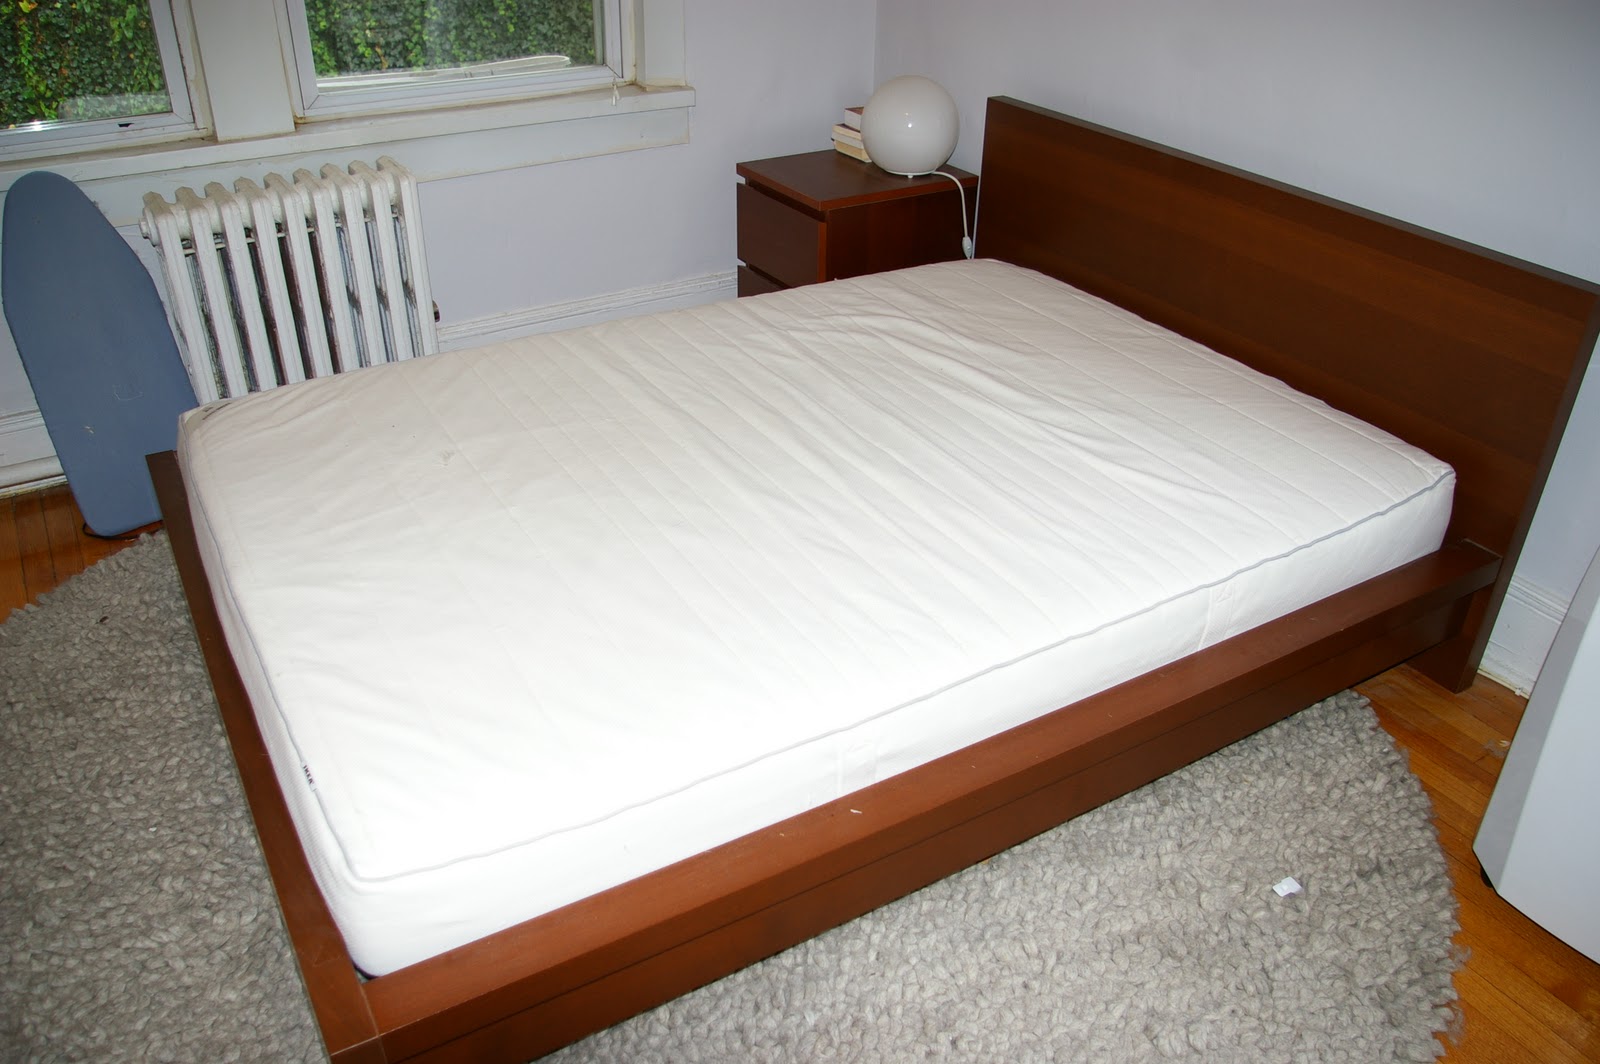 great full size mattress for youth